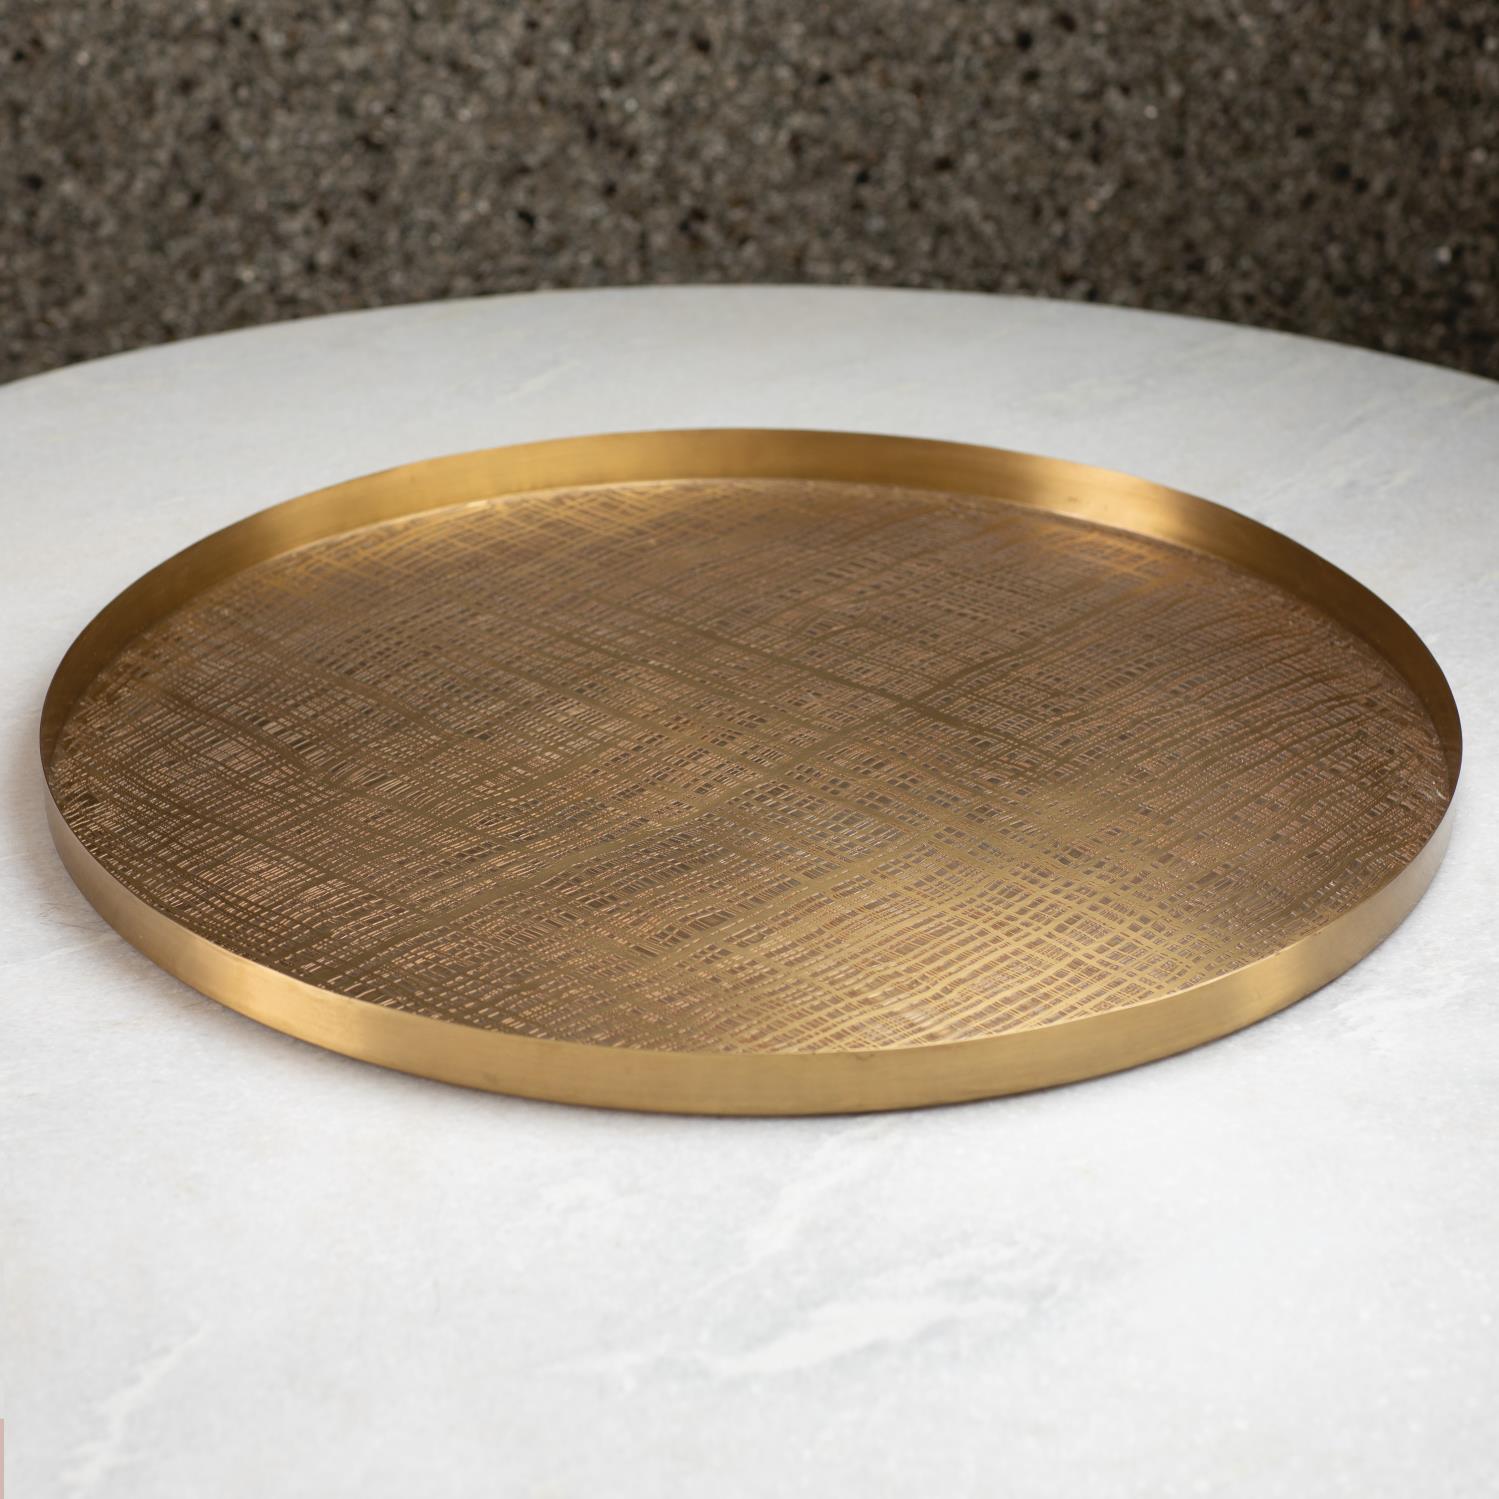 Plaid Etched Tray-Antique Brass